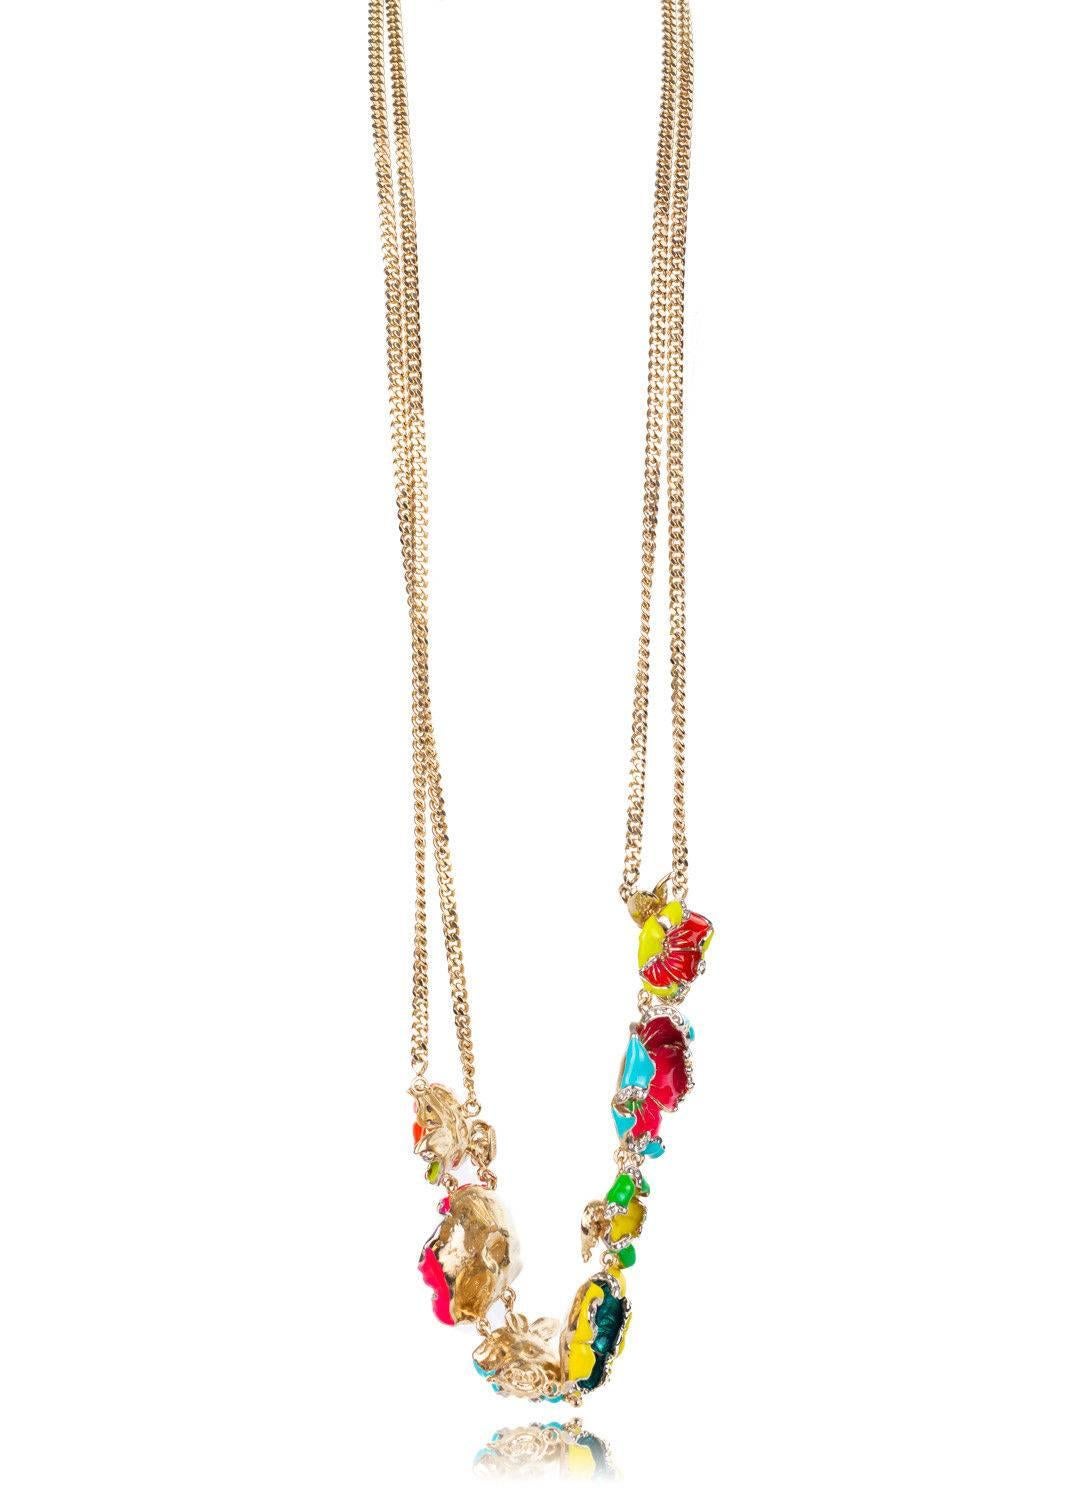 Beige Roberto Cavalli Multicolored Floral Embellished Double Chain Necklace  For Sale